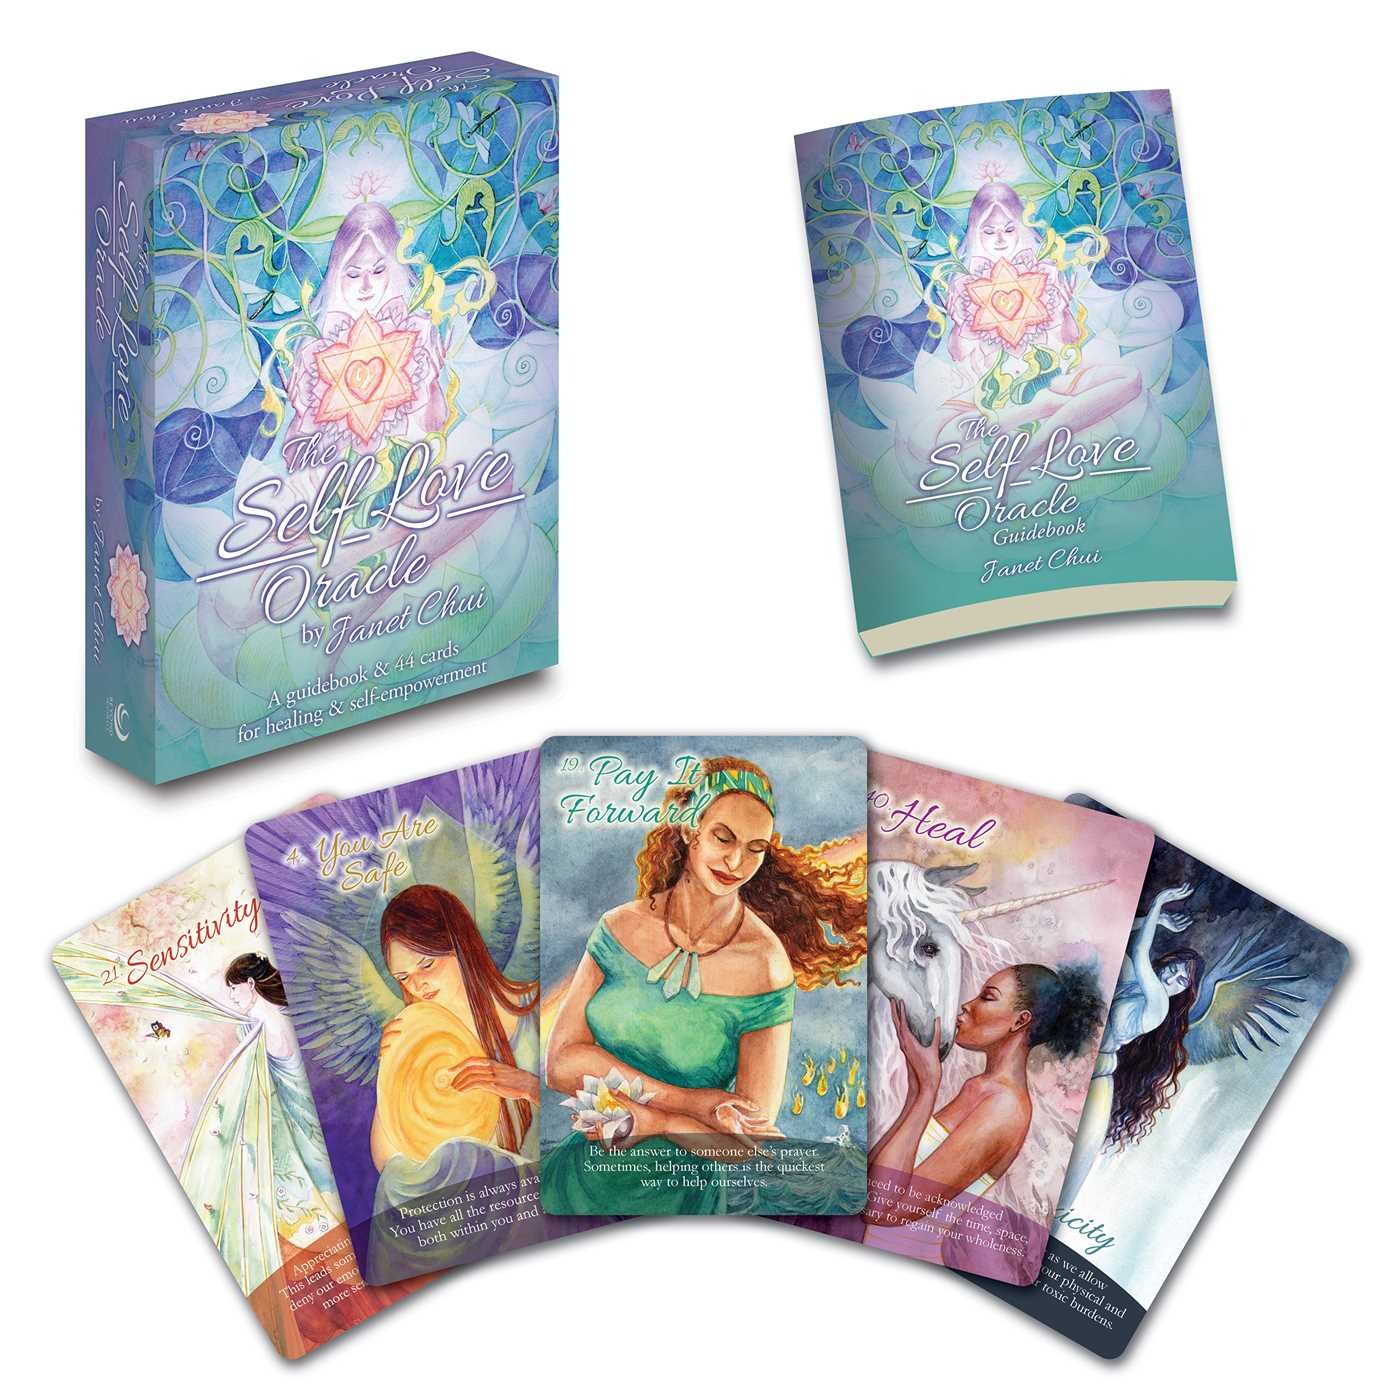 self love oracle deck and cards